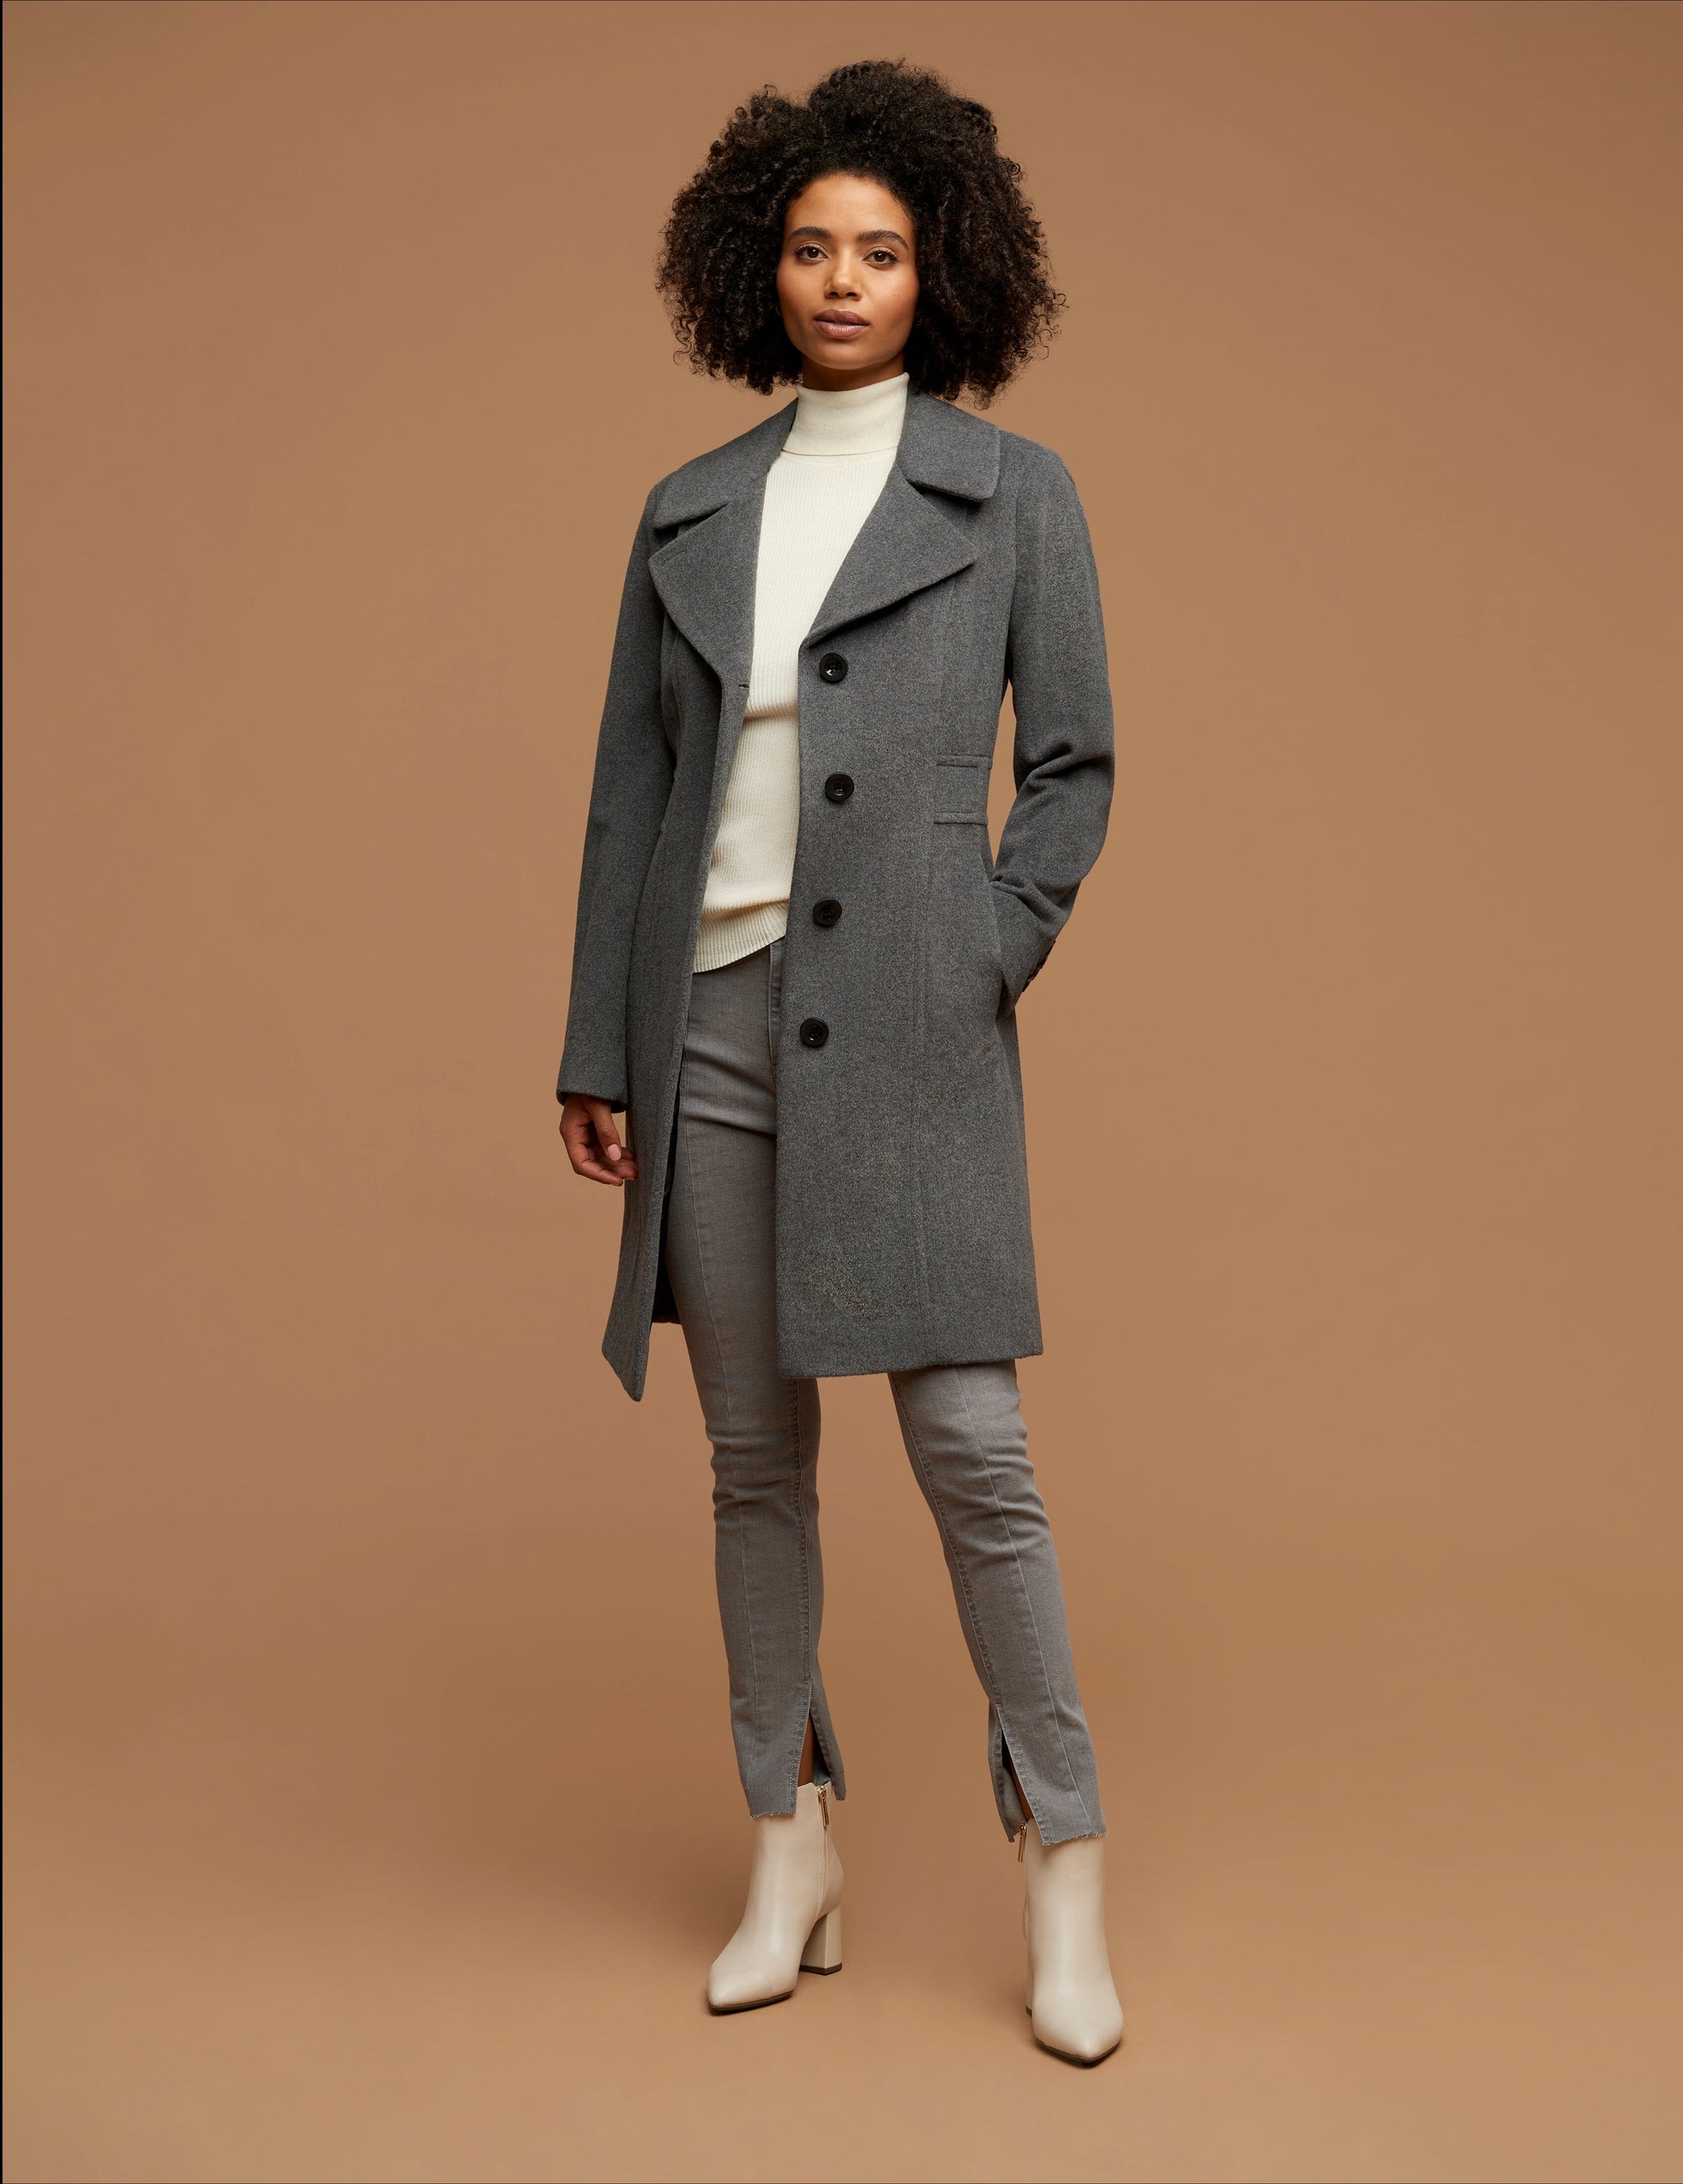 Opt for grey or light brown coats